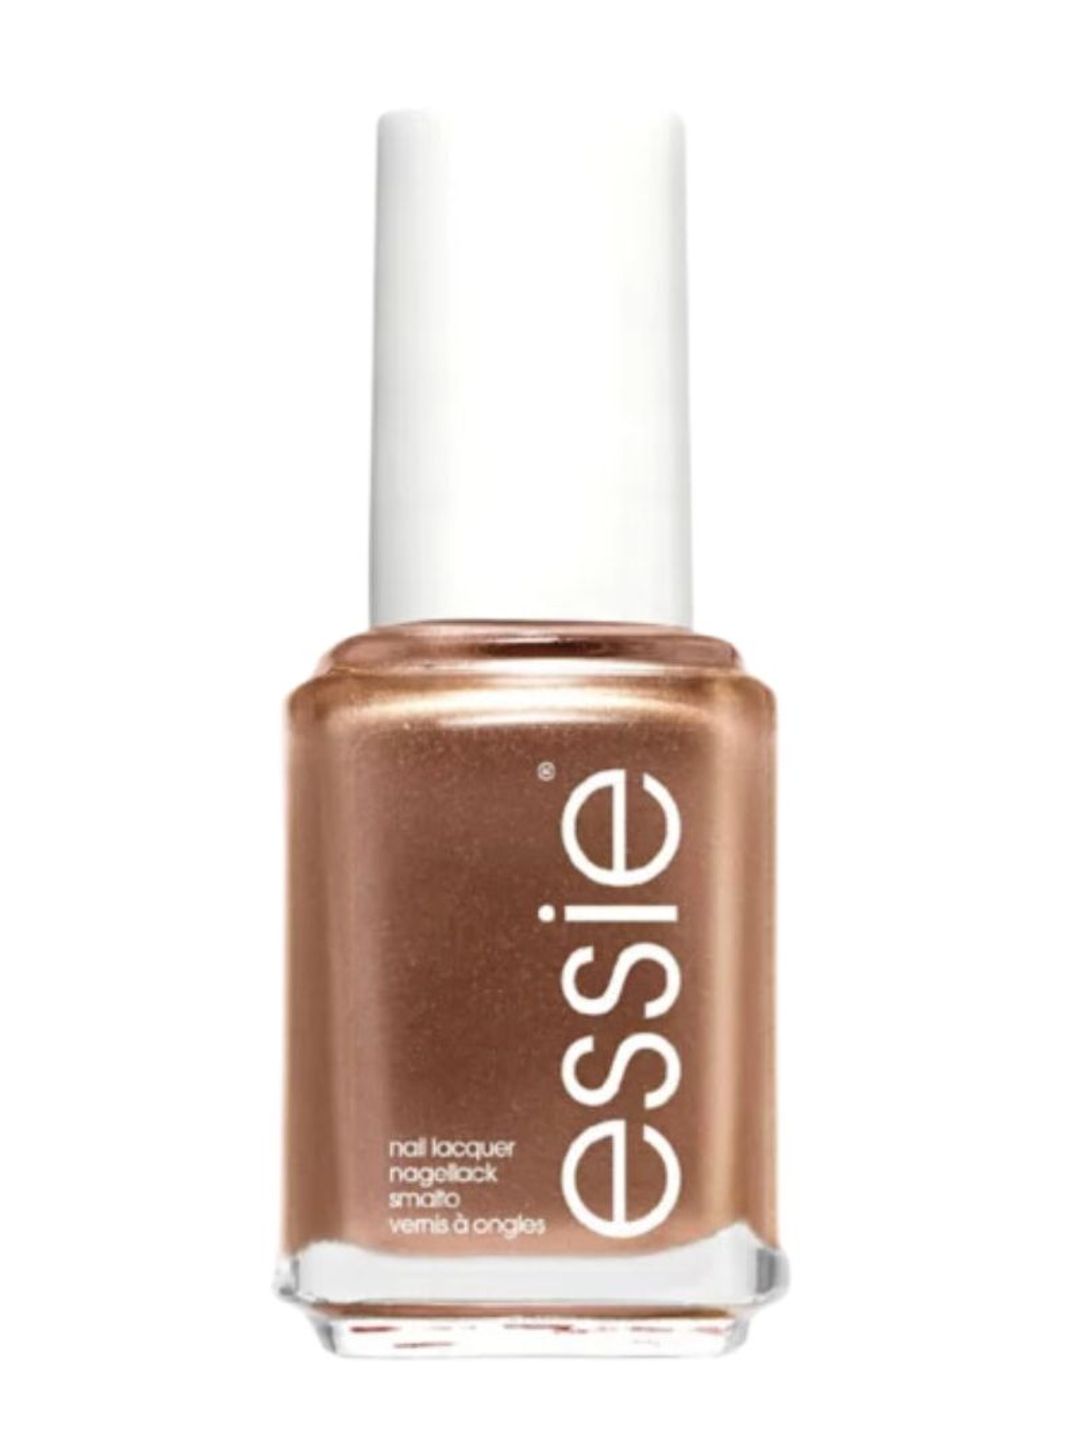 Nail Lacquer in '613 Penny Talk' - Essie 